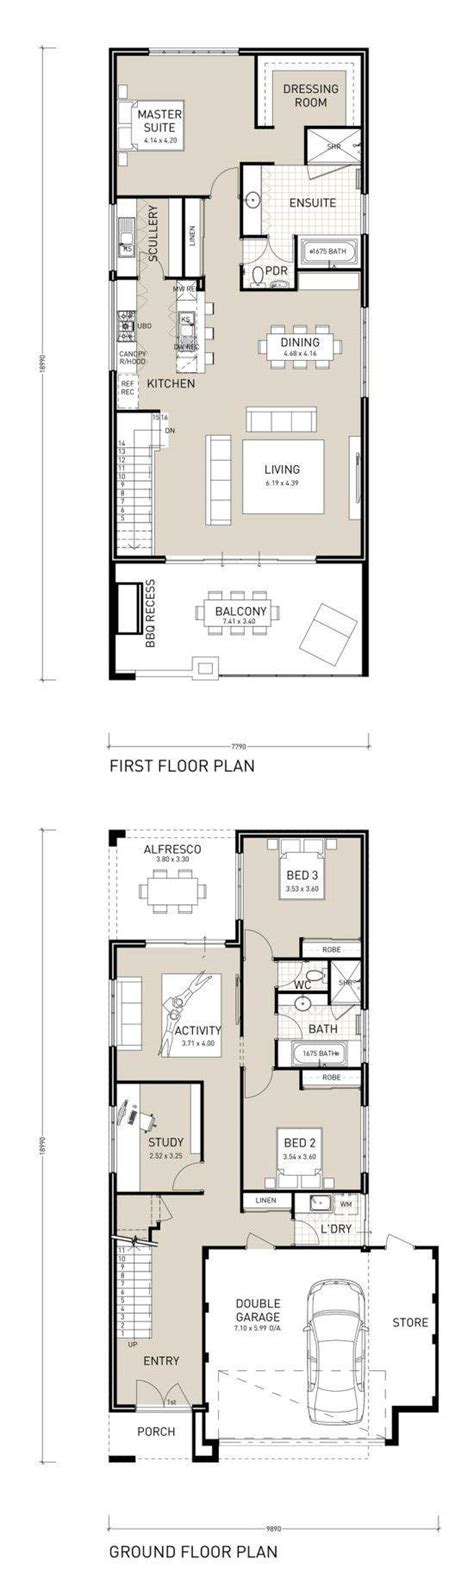 Our award winning residential house plans, architectural home designs, floor plans, blueprints and home plans will make your dream home a reality! Adorable Best Reverse Living House Plans - House Plans ...